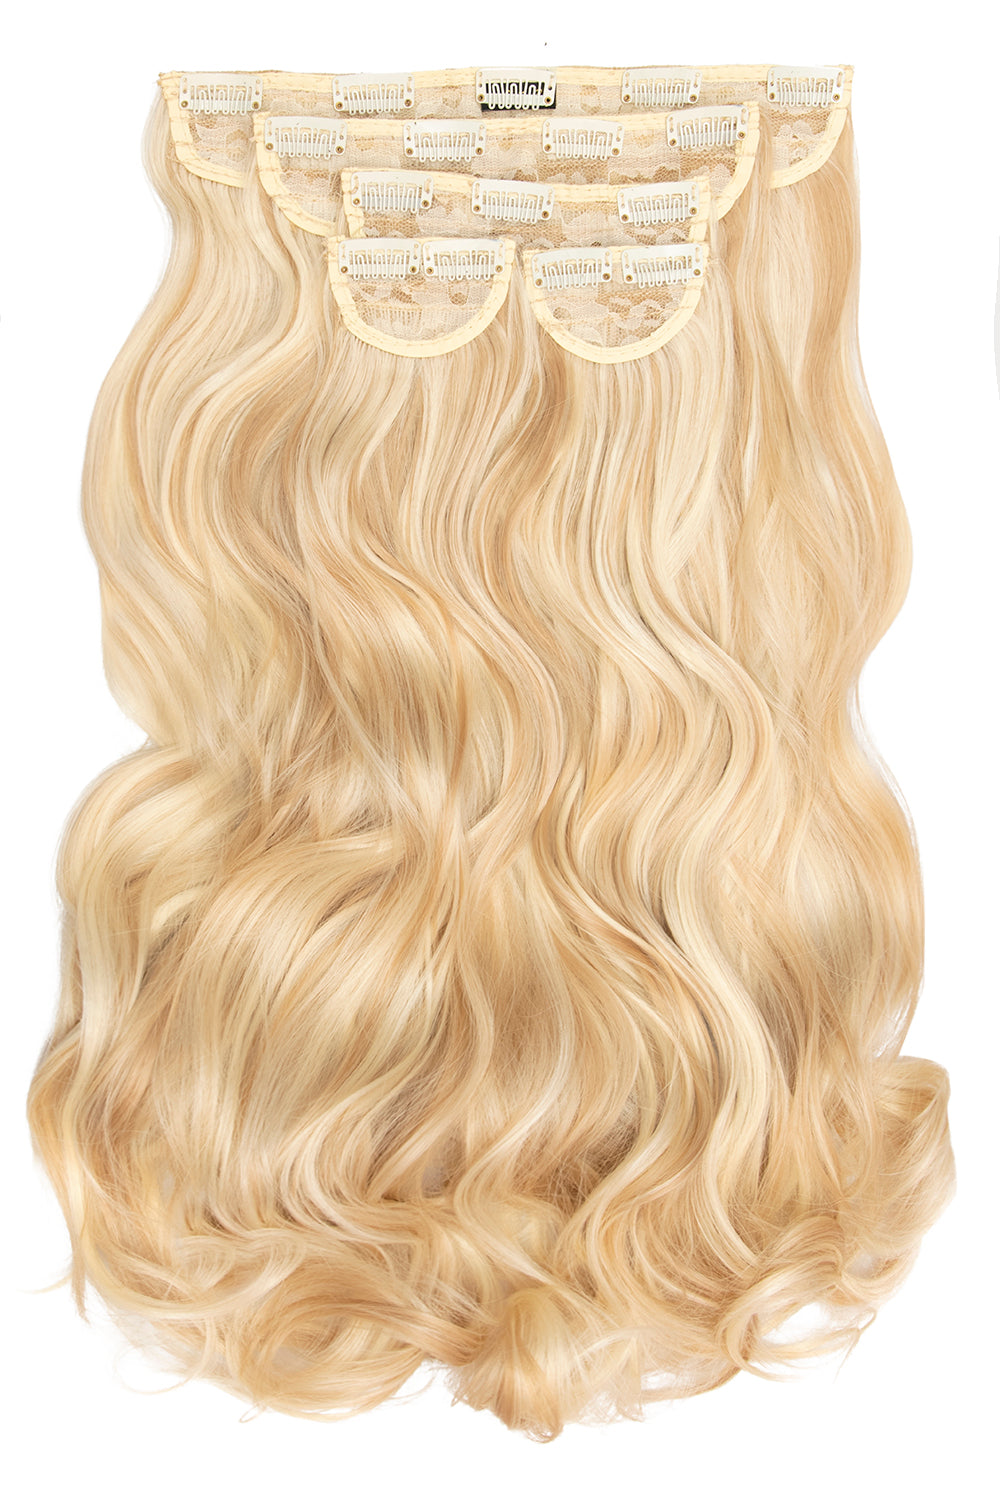 Super Thick 22" 5 Piece Curly Clip In Hair Extensions - Highlighted Champagne